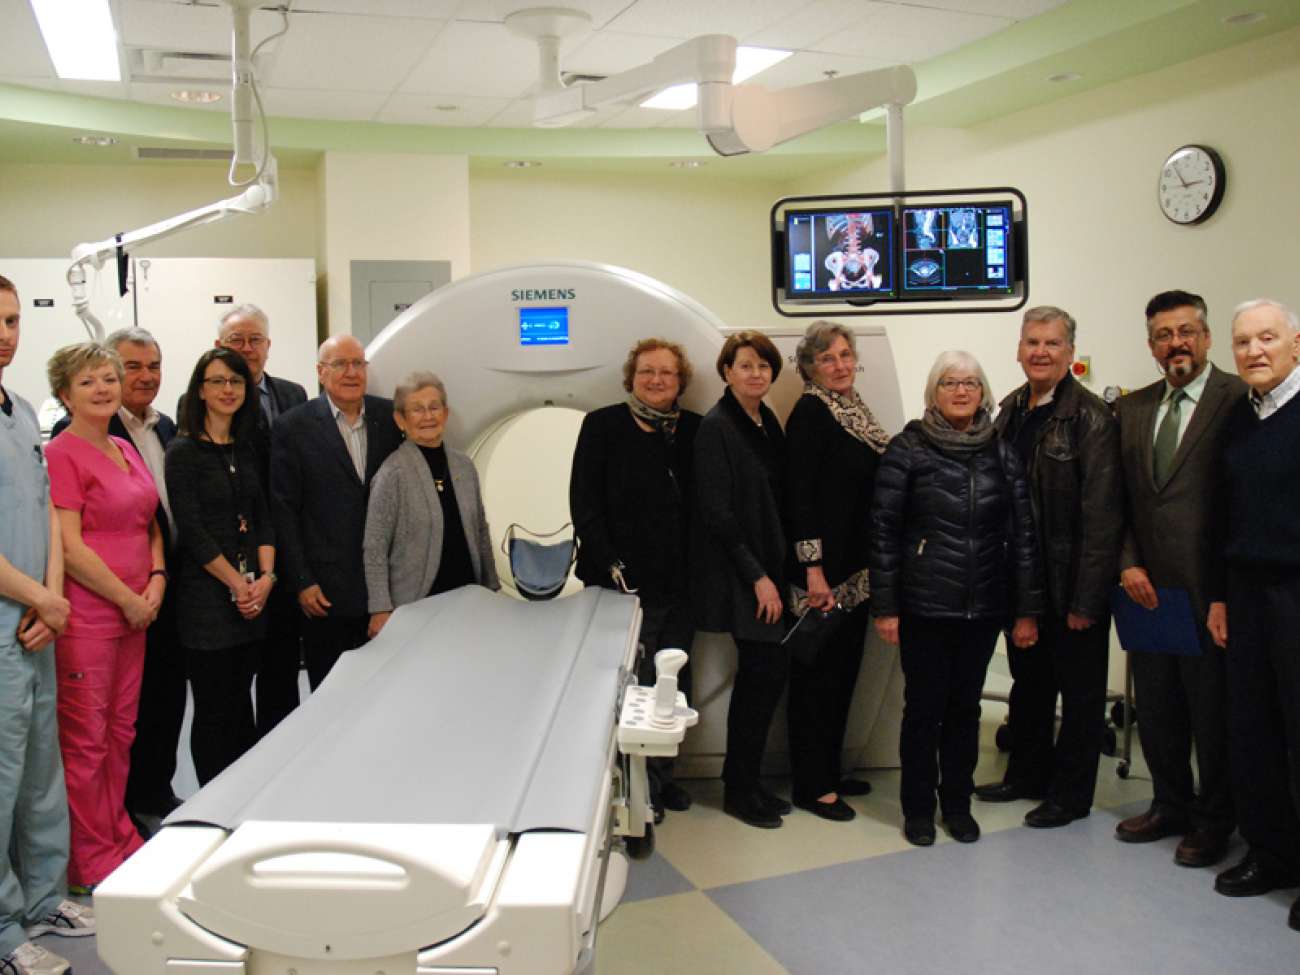 GRH and GRHF board members and senior leadership were joined by donors to tour the new CT scanner and see how their contributions will make a difference.